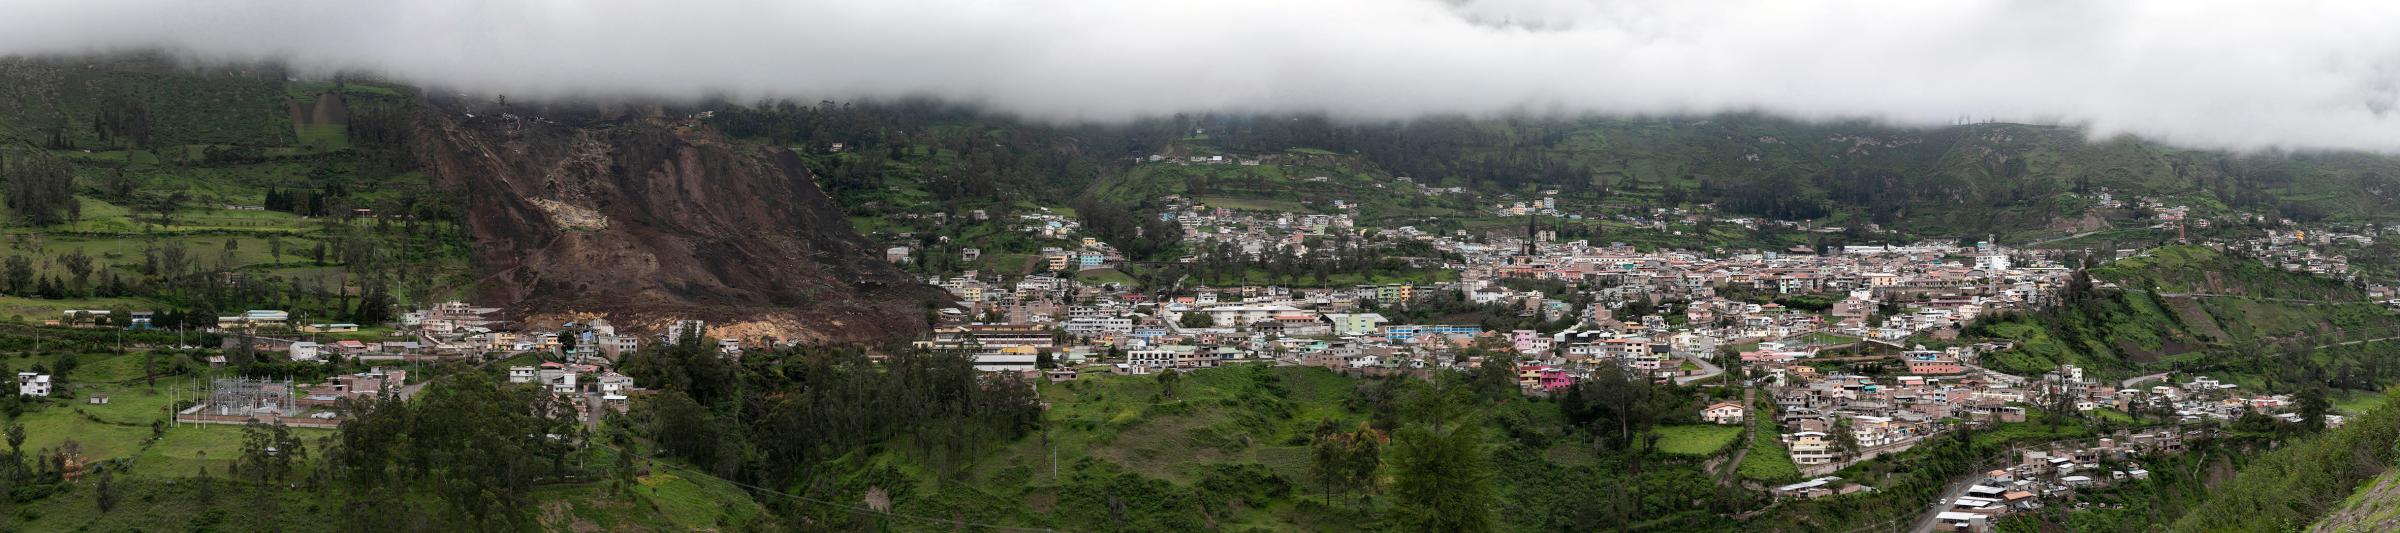 Landslide in Alausí, Chimborazo - For Reuters - Panoramic view of Alausí, a town in the central...